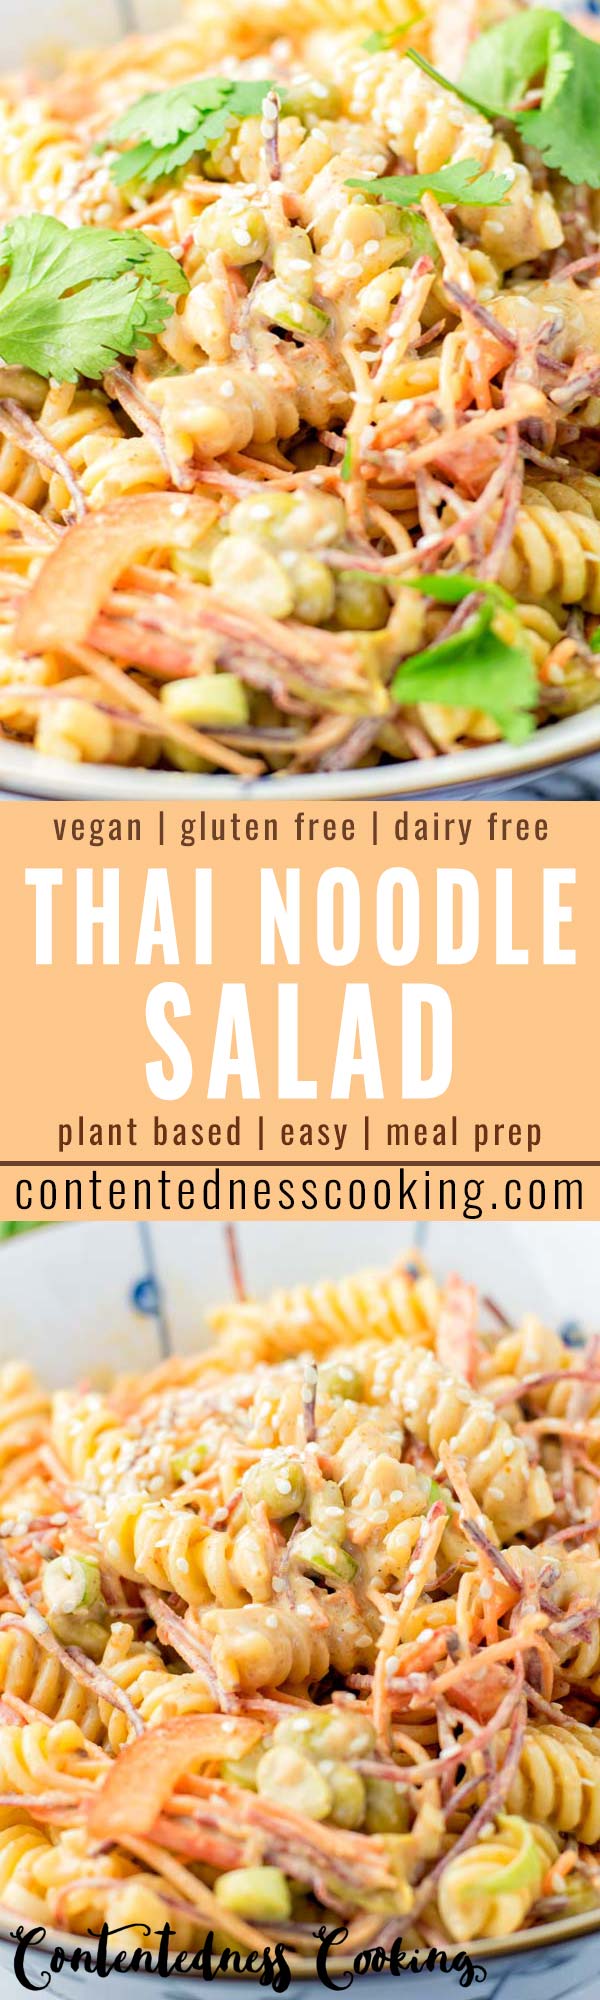 Filling and satisfying: This Thai Noodle Salad is covered in the most delicious Thai peanut sauce you’ve ever made and tasted. A keeper that tastes so delicious for dinner, lunch, meal prep and is so easy to make that the whole family will love, even the pickiest kids. #vegan #dairyfree #glutenfree #vegetarian #thainoodlesalad #peanutsauce #dinner #lunch #mealprep #comfortfood #worklunchideas #budgetmeals #contentednesscooking #comfortfood #familymeals